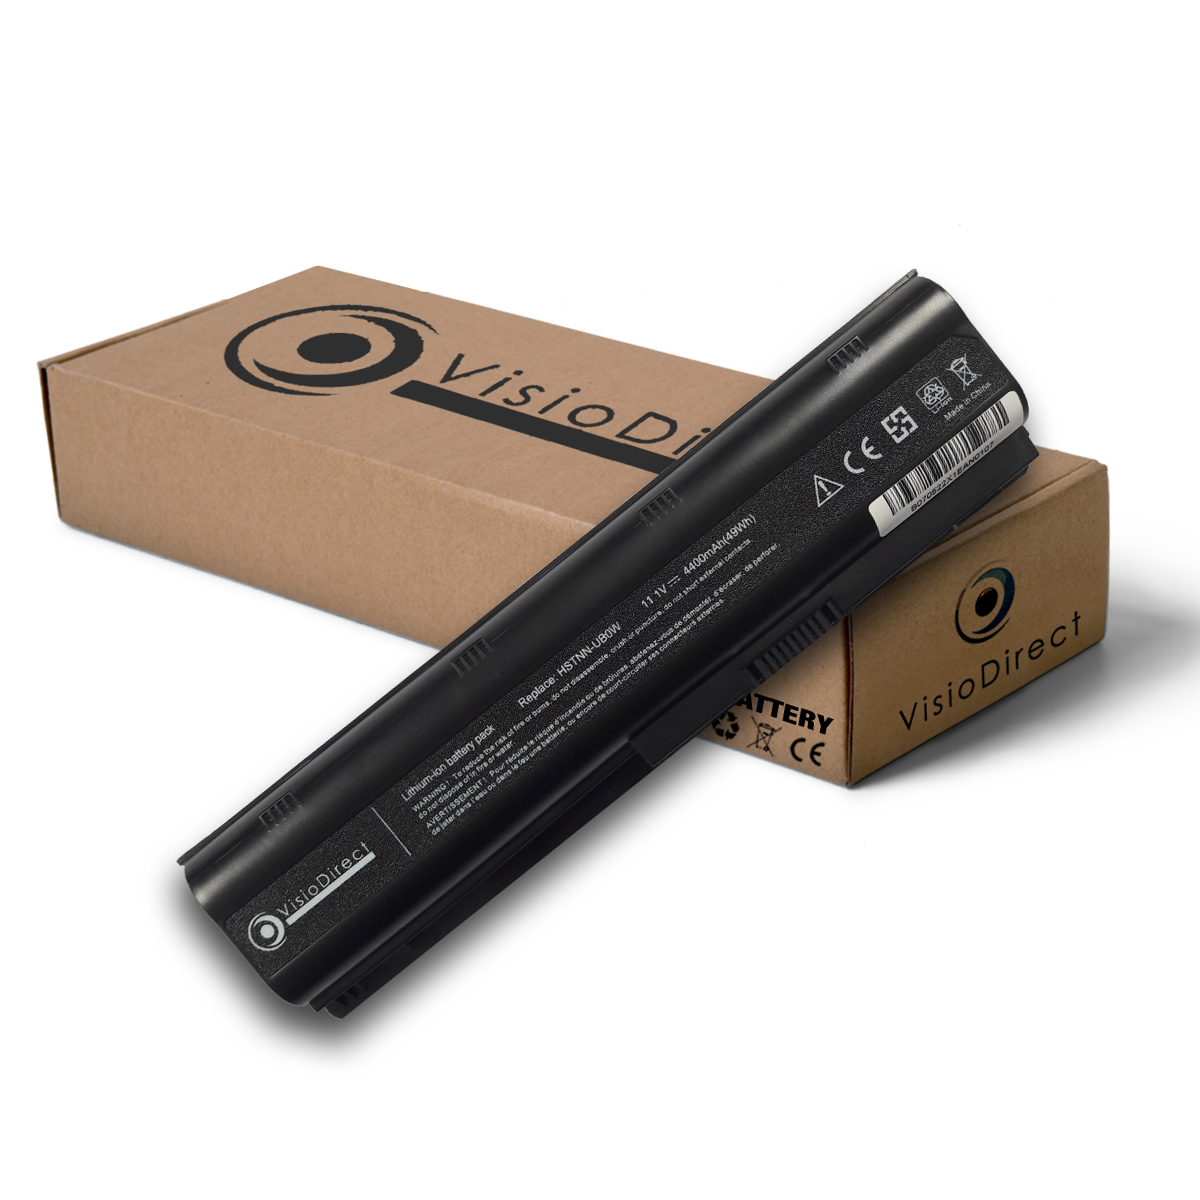 Visiodirect® Batterie pour or...